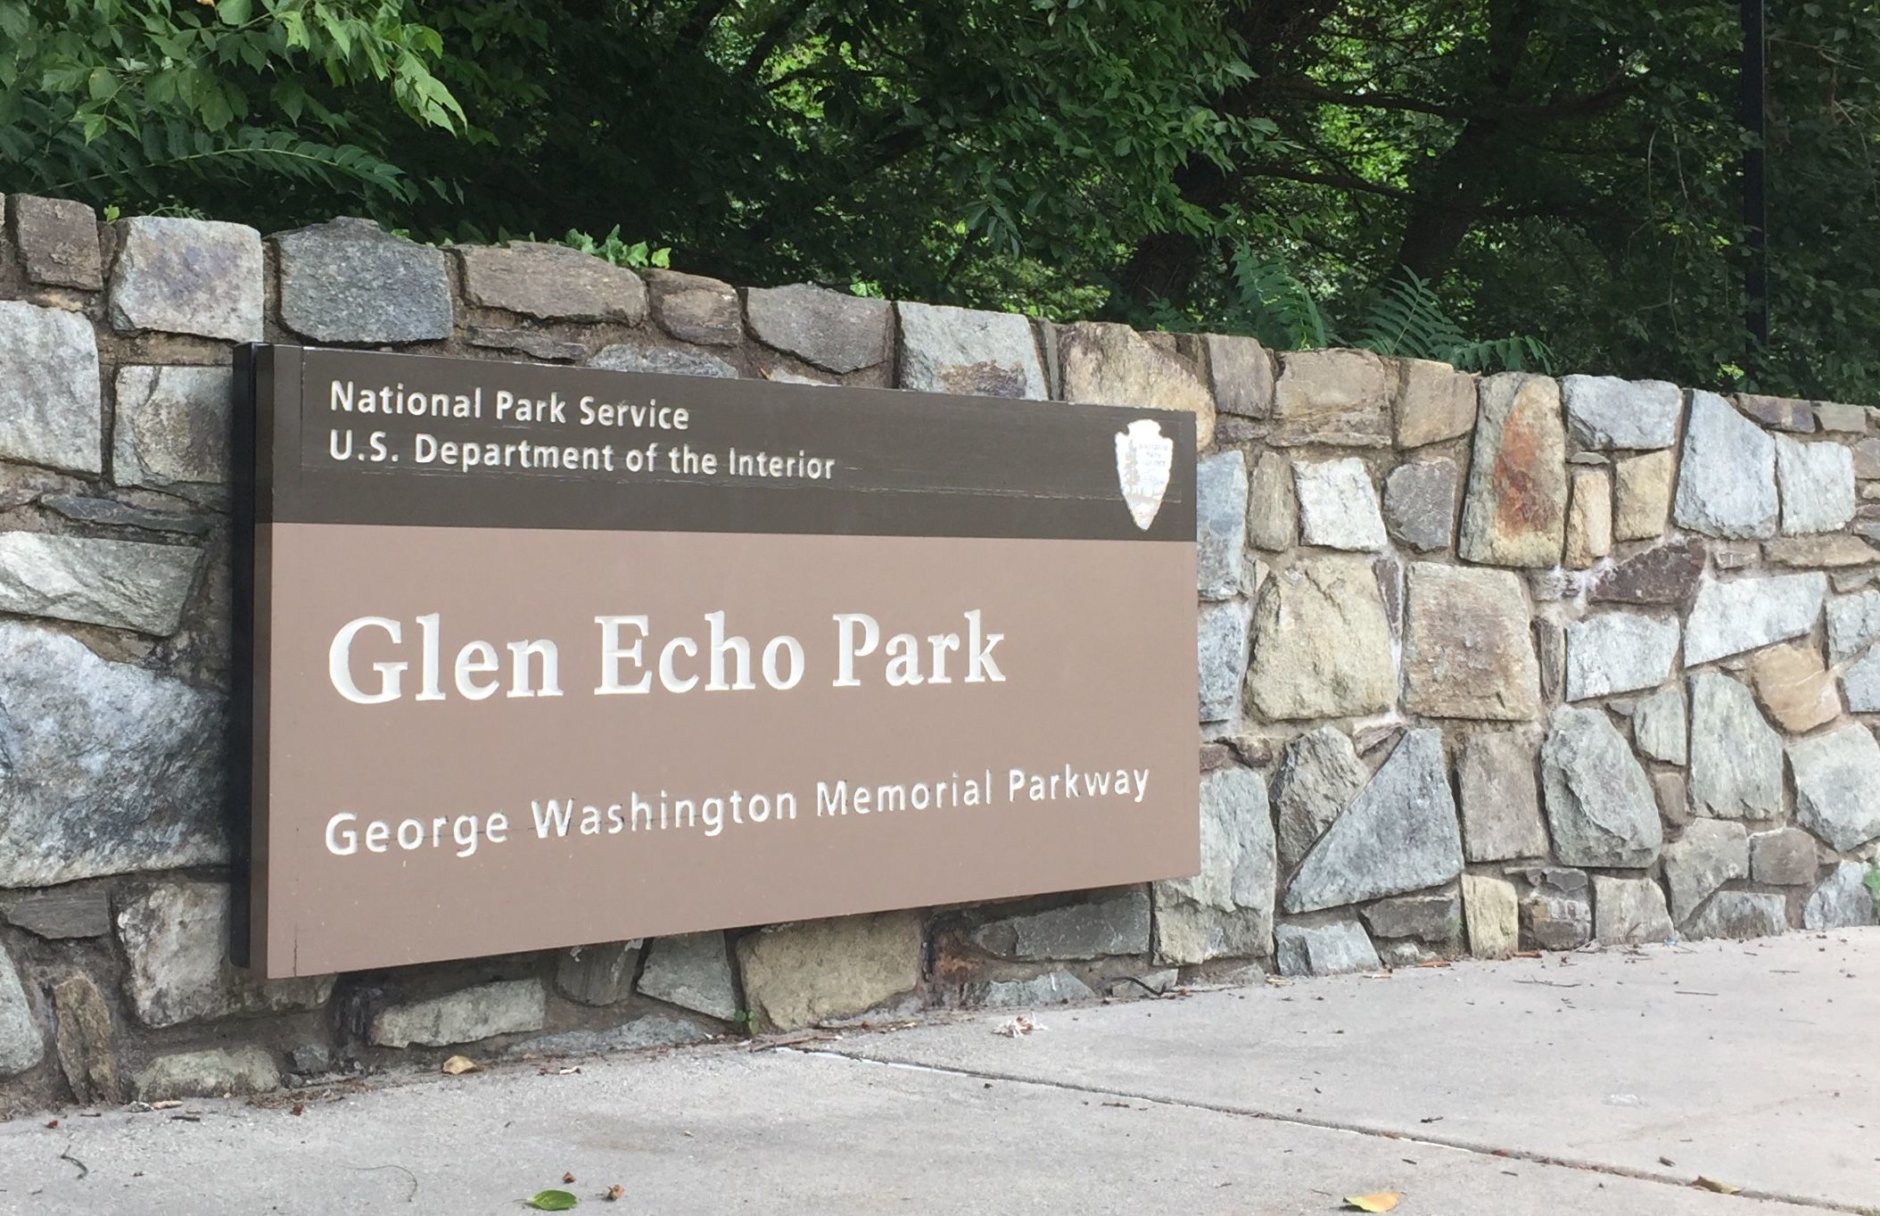 Glen Echo Park will remain the property of the National Park Service and retain its status as a national park while under new management. (WTOP/Kristi King)